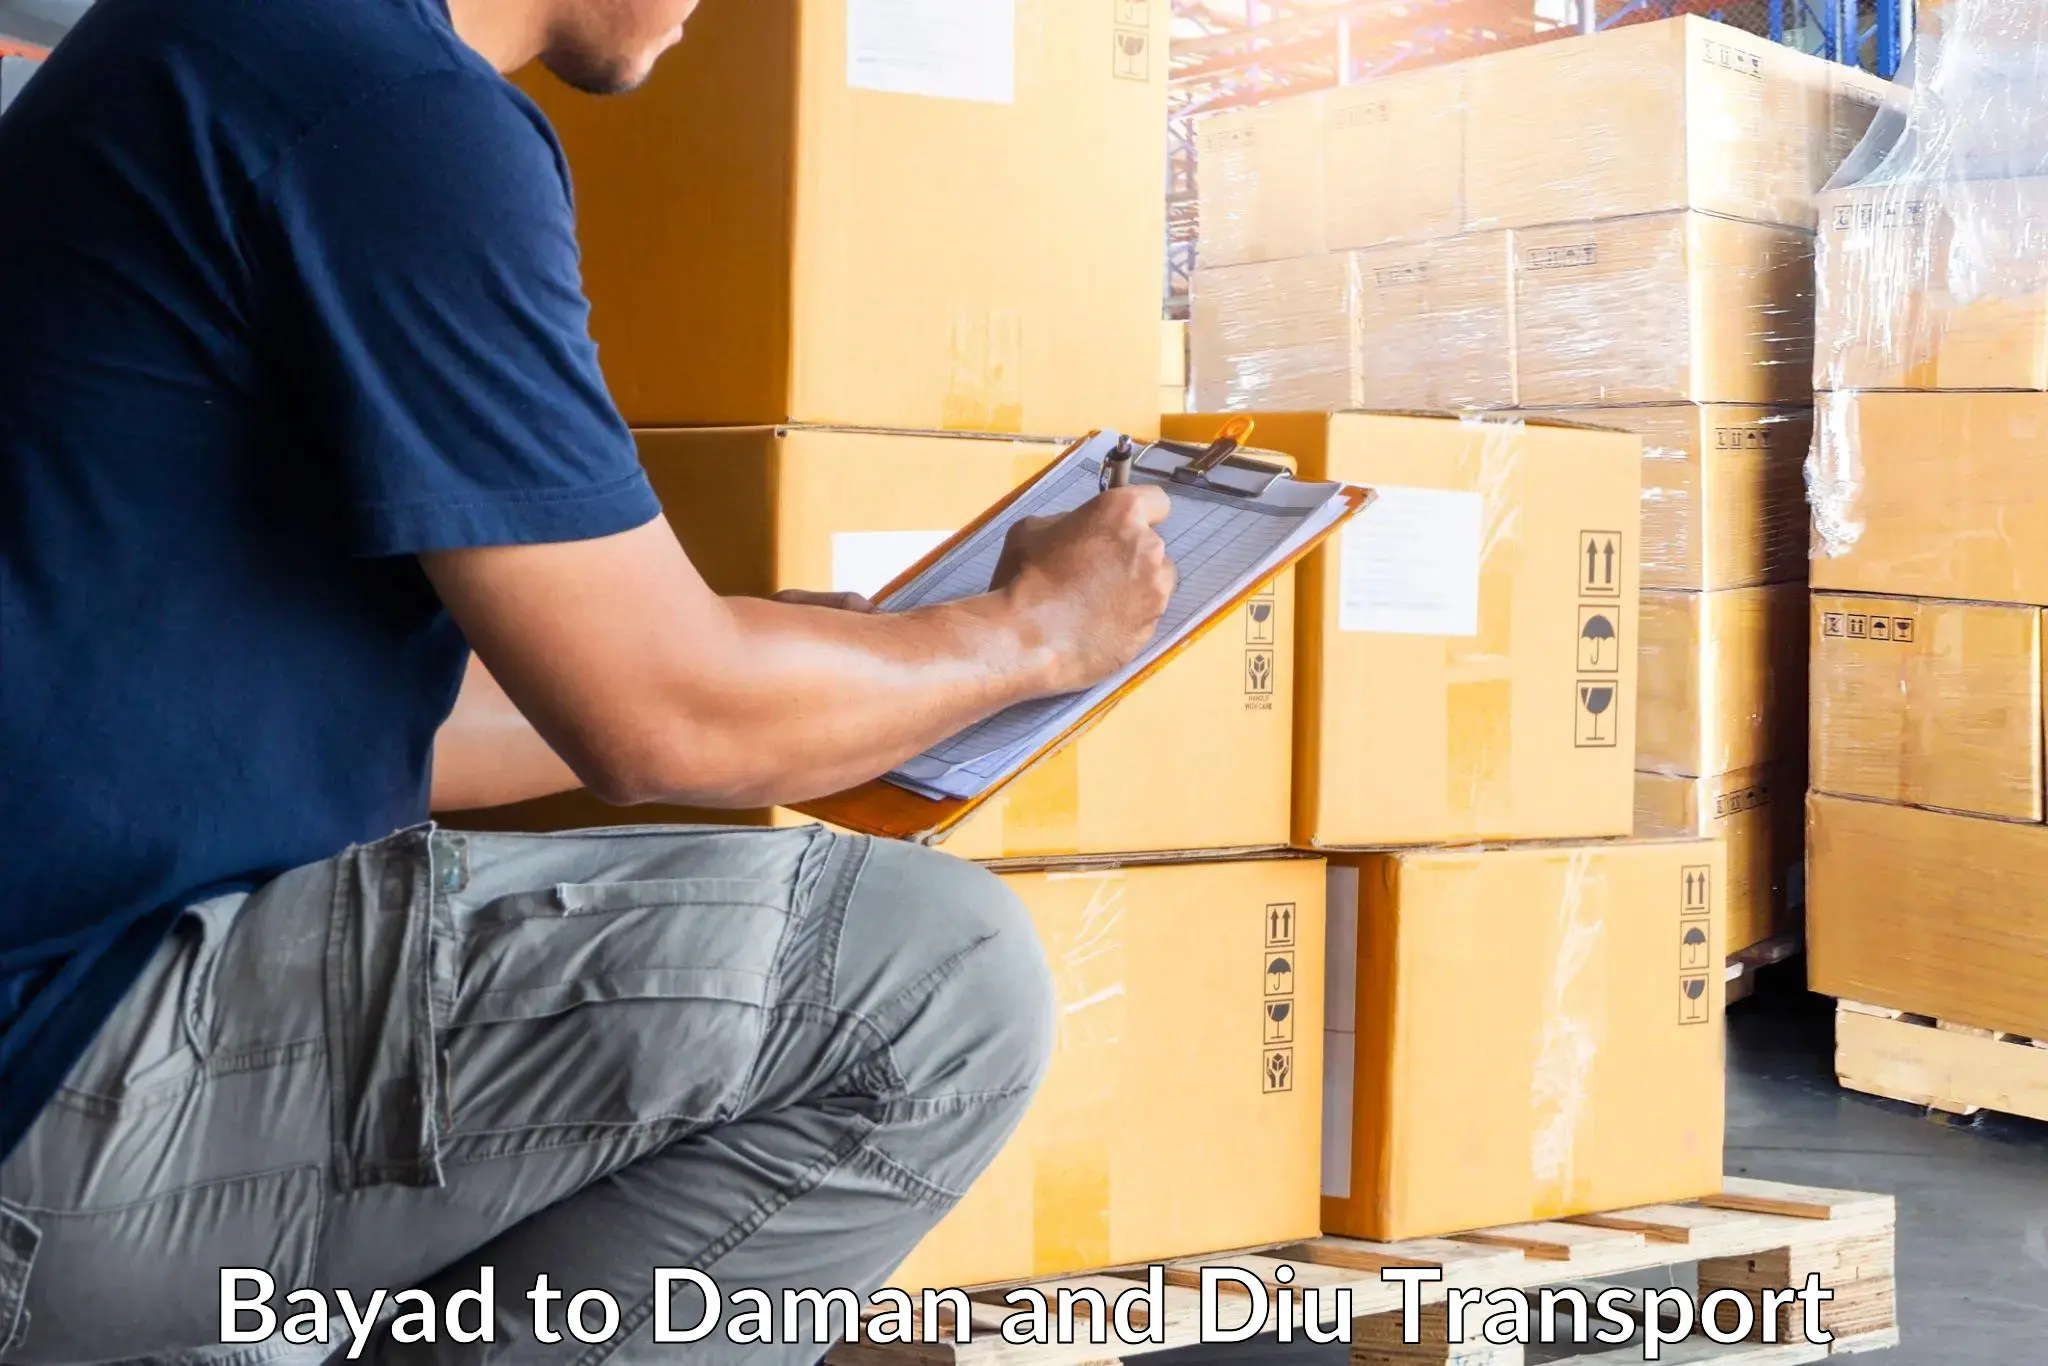 Air freight transport services Bayad to Daman